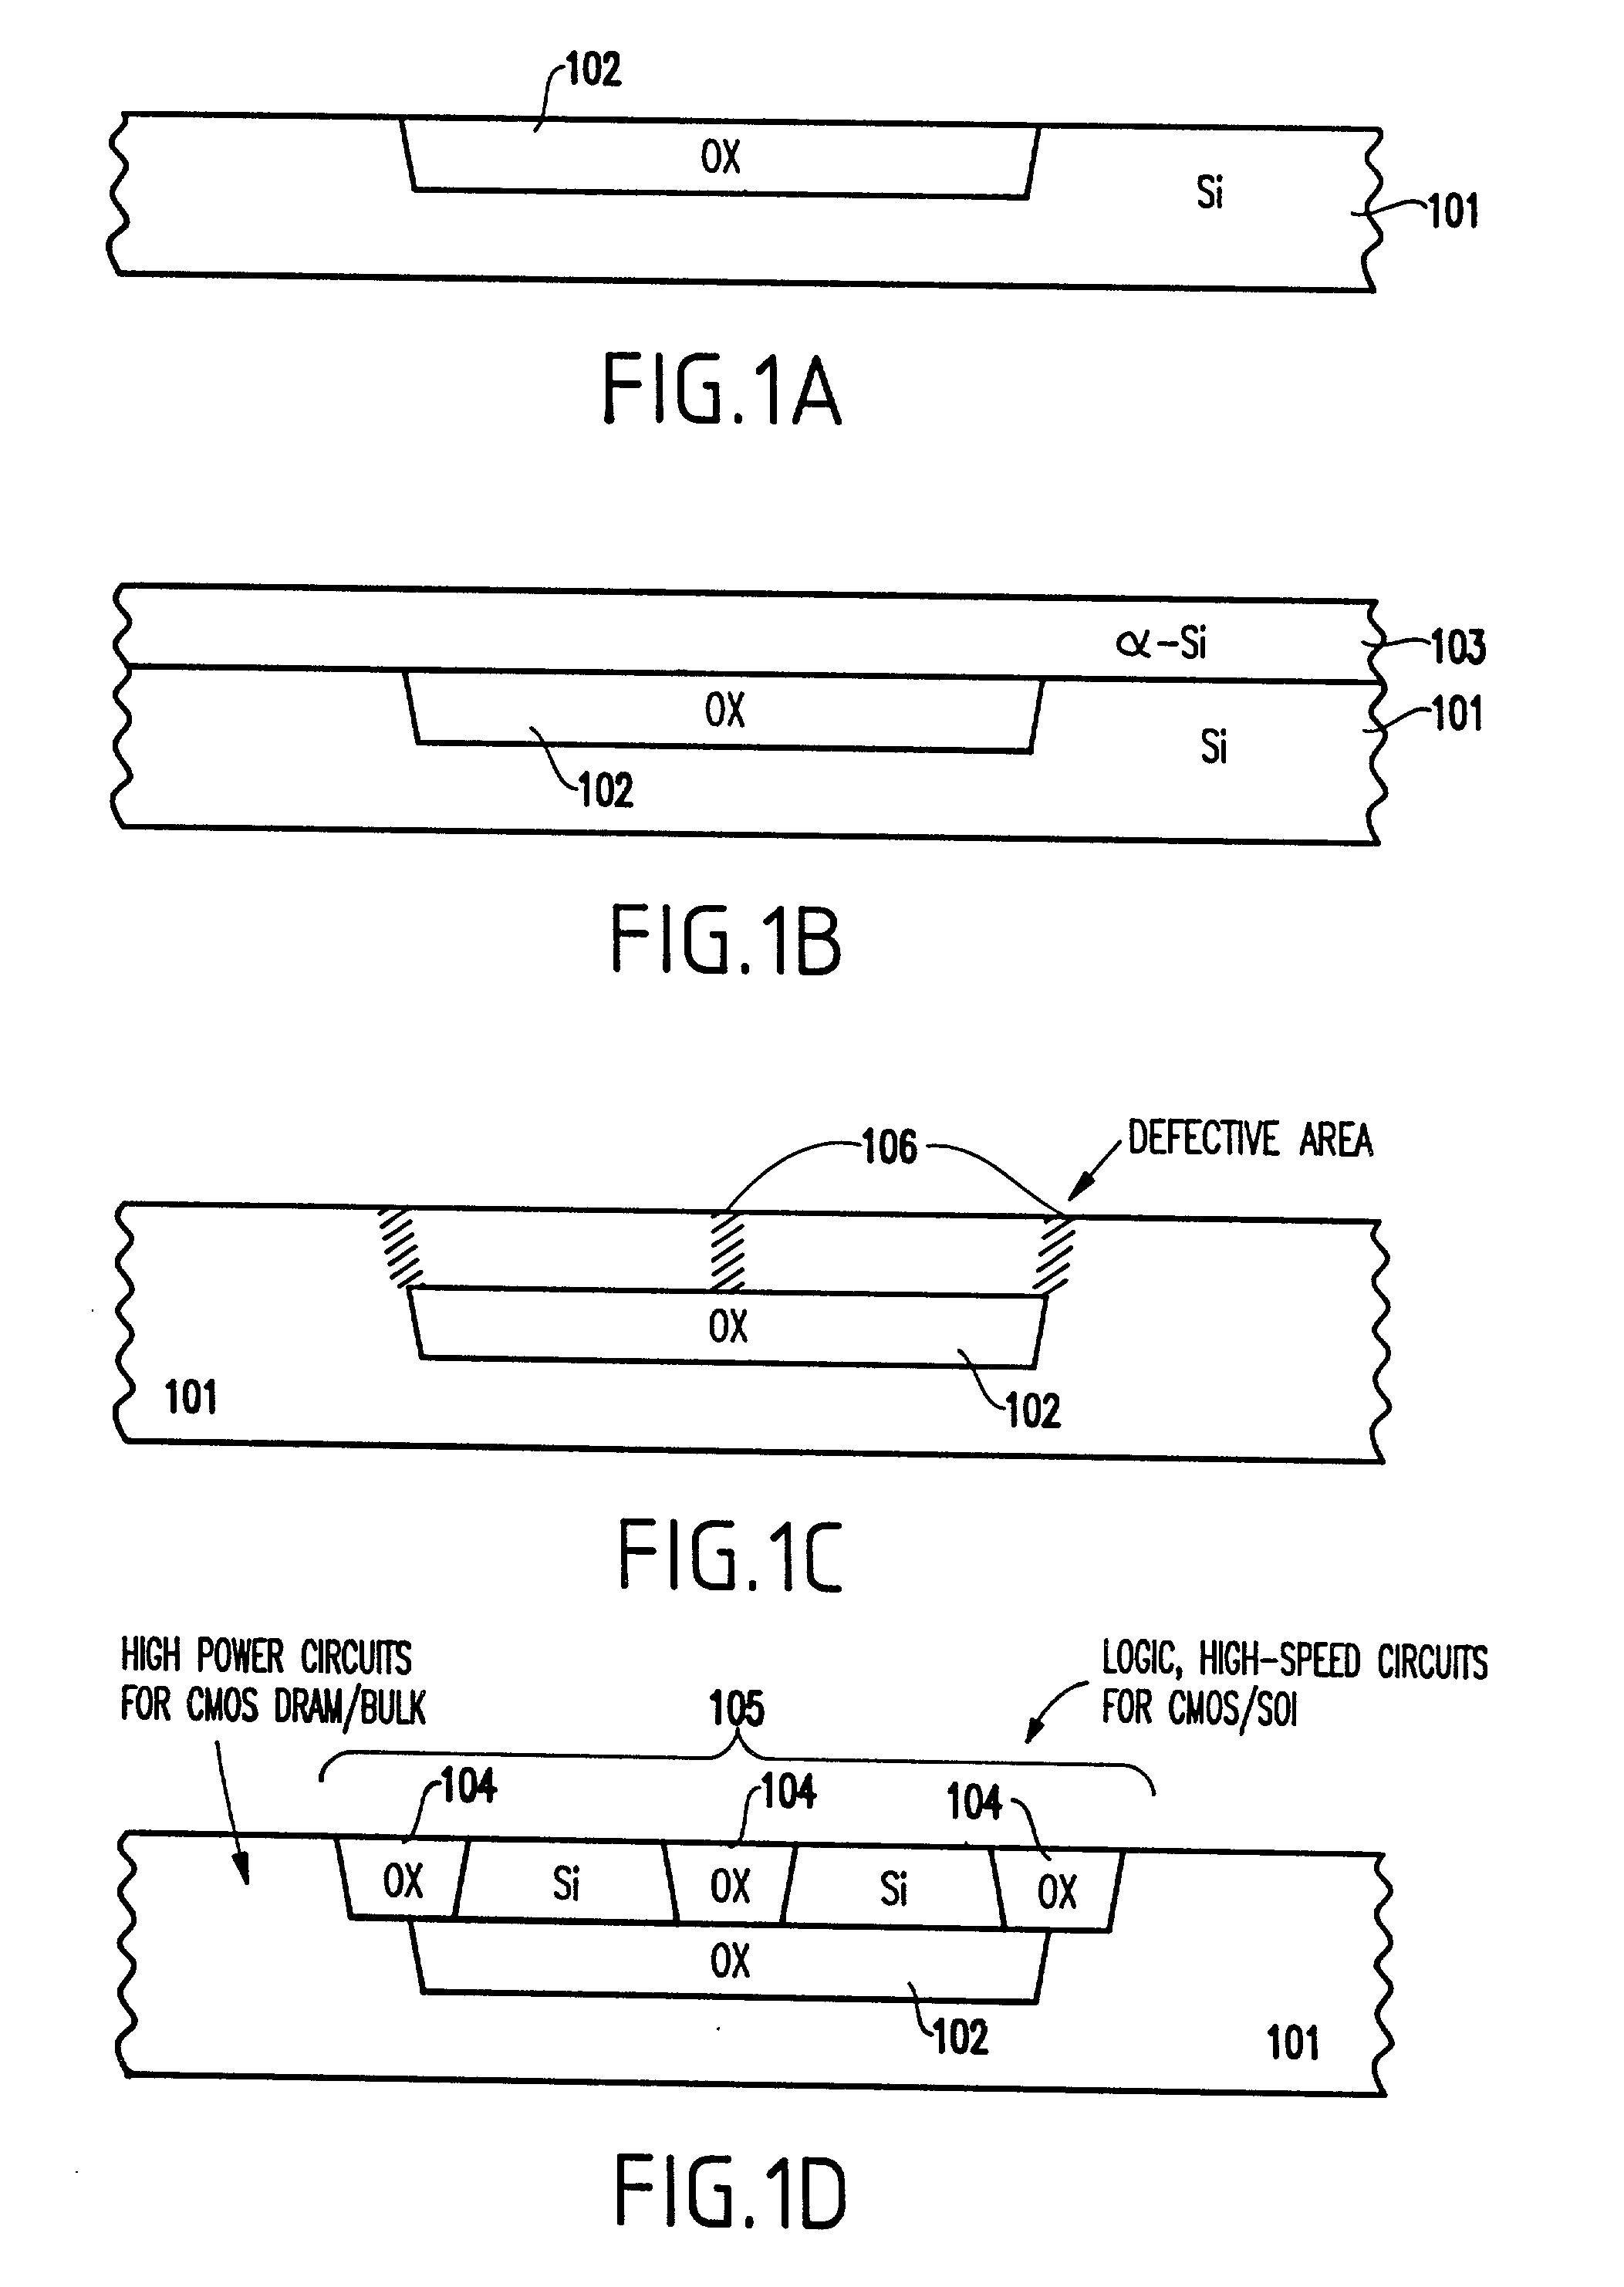 Method for fabricating complementary metal oxide semiconductor (CMOS) devices on a mixed bulk and silicon-on-insulator (SOI) substrate